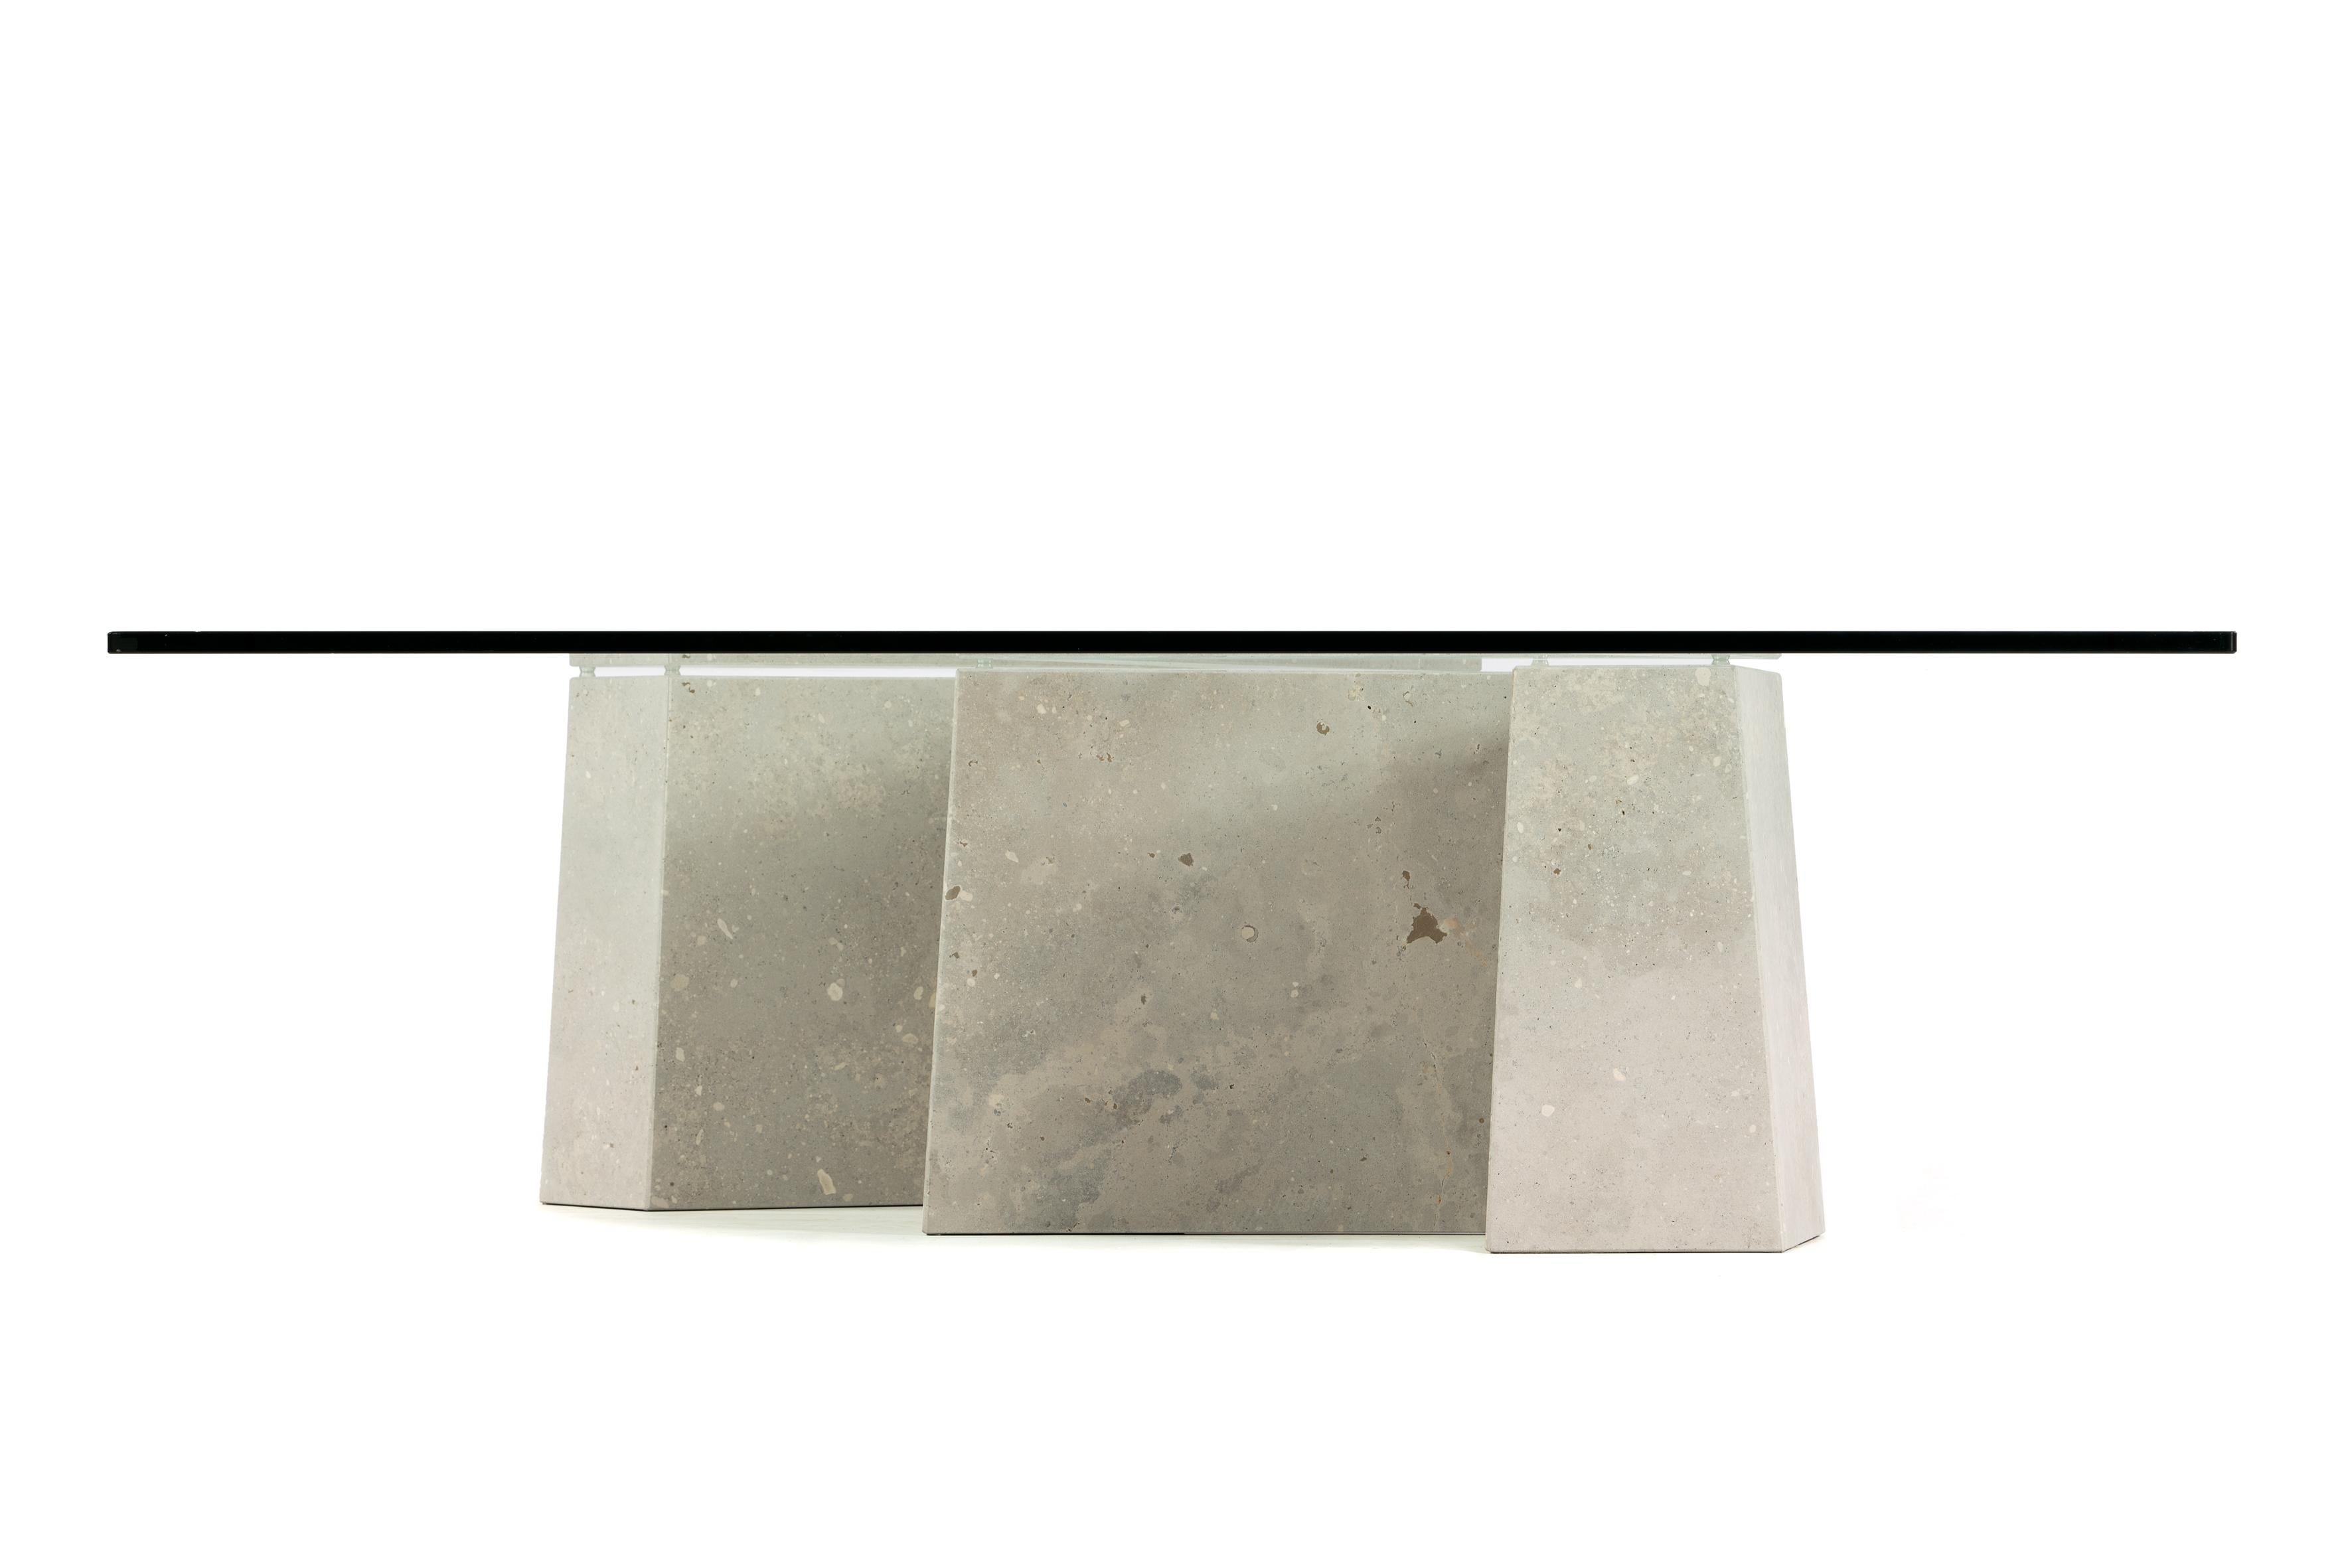 Maule is a coffee table in natural stone with an organic design of asymmetrical straight lines. Its limestone structure is hollow so it is not a solid piece, but a set of assembled pieces. On the surface is a glass top of exquisite